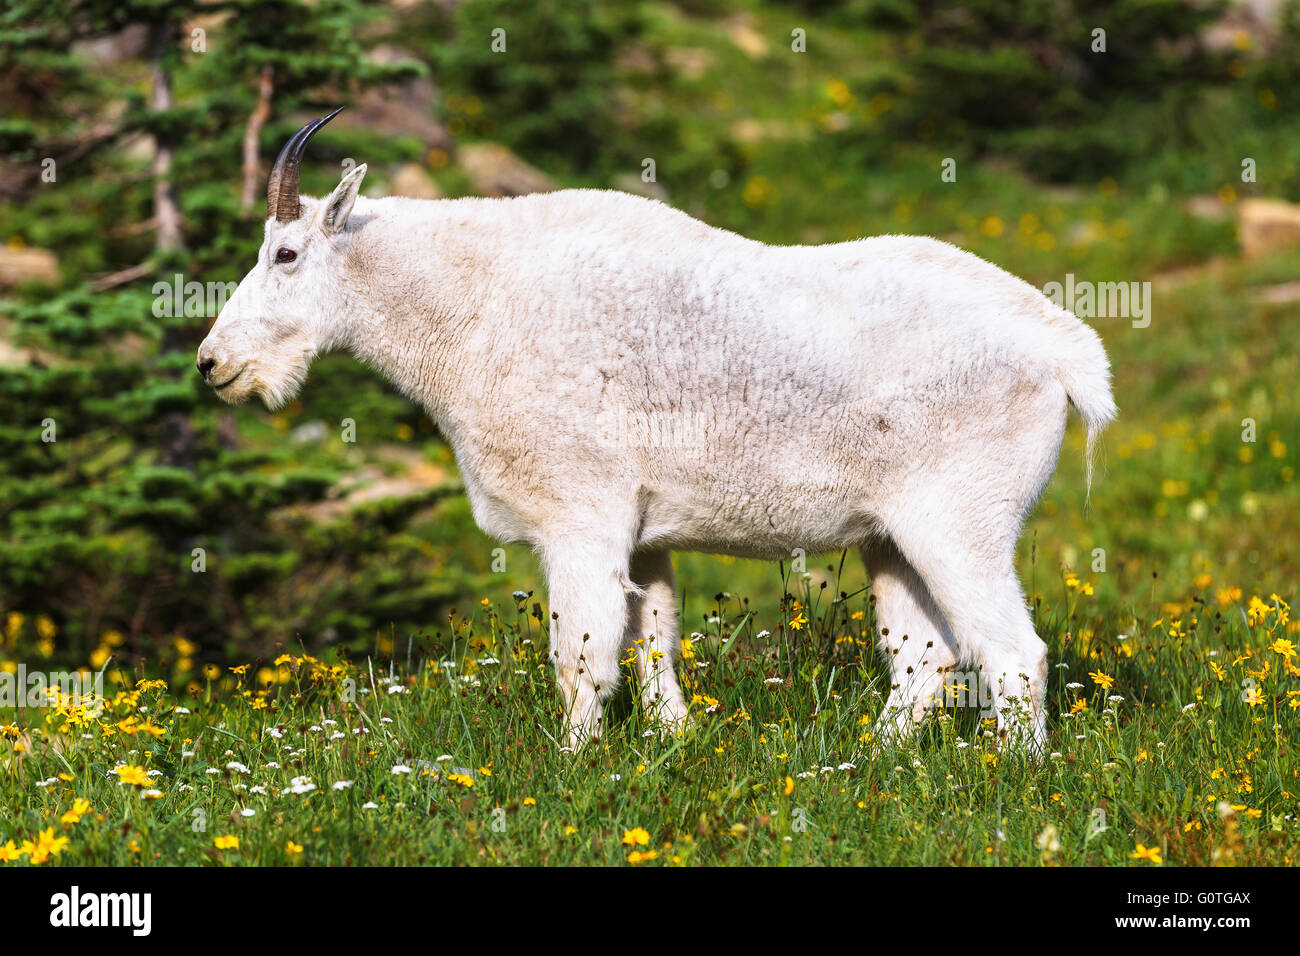 A mountain goat by Glacier National Park, Montana, United States of America. Stock Photo